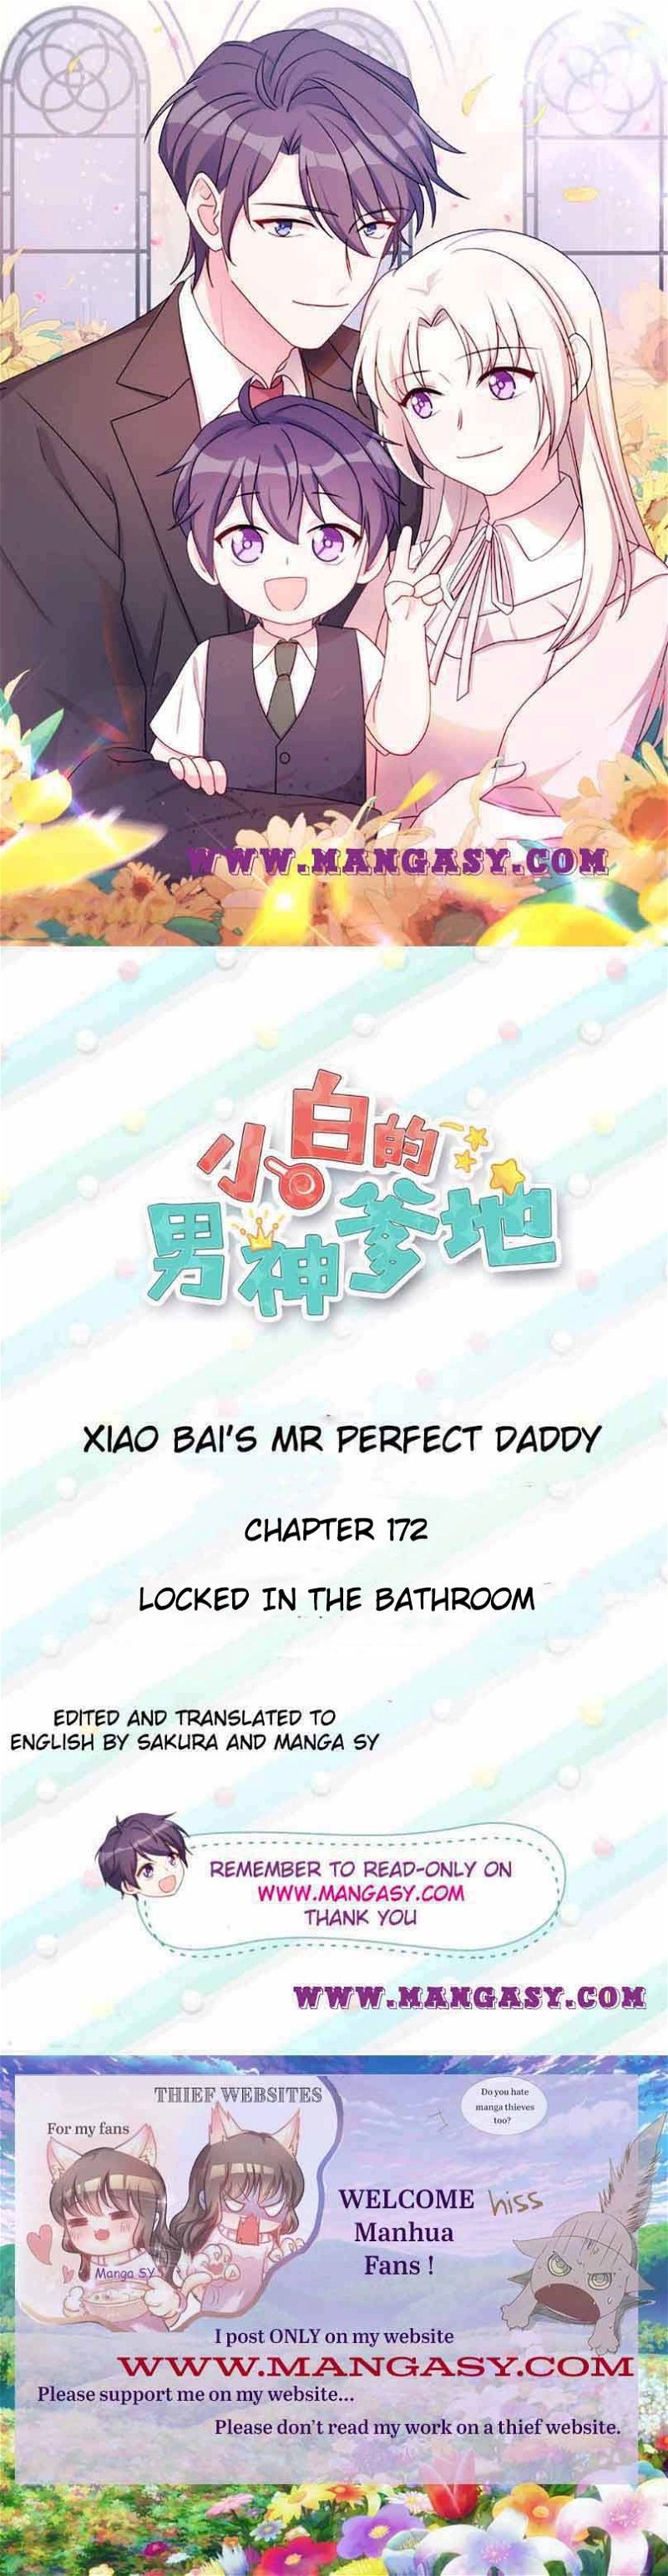 Xiao Bai’s father is a wonderful person Chapter 172 - Page 0